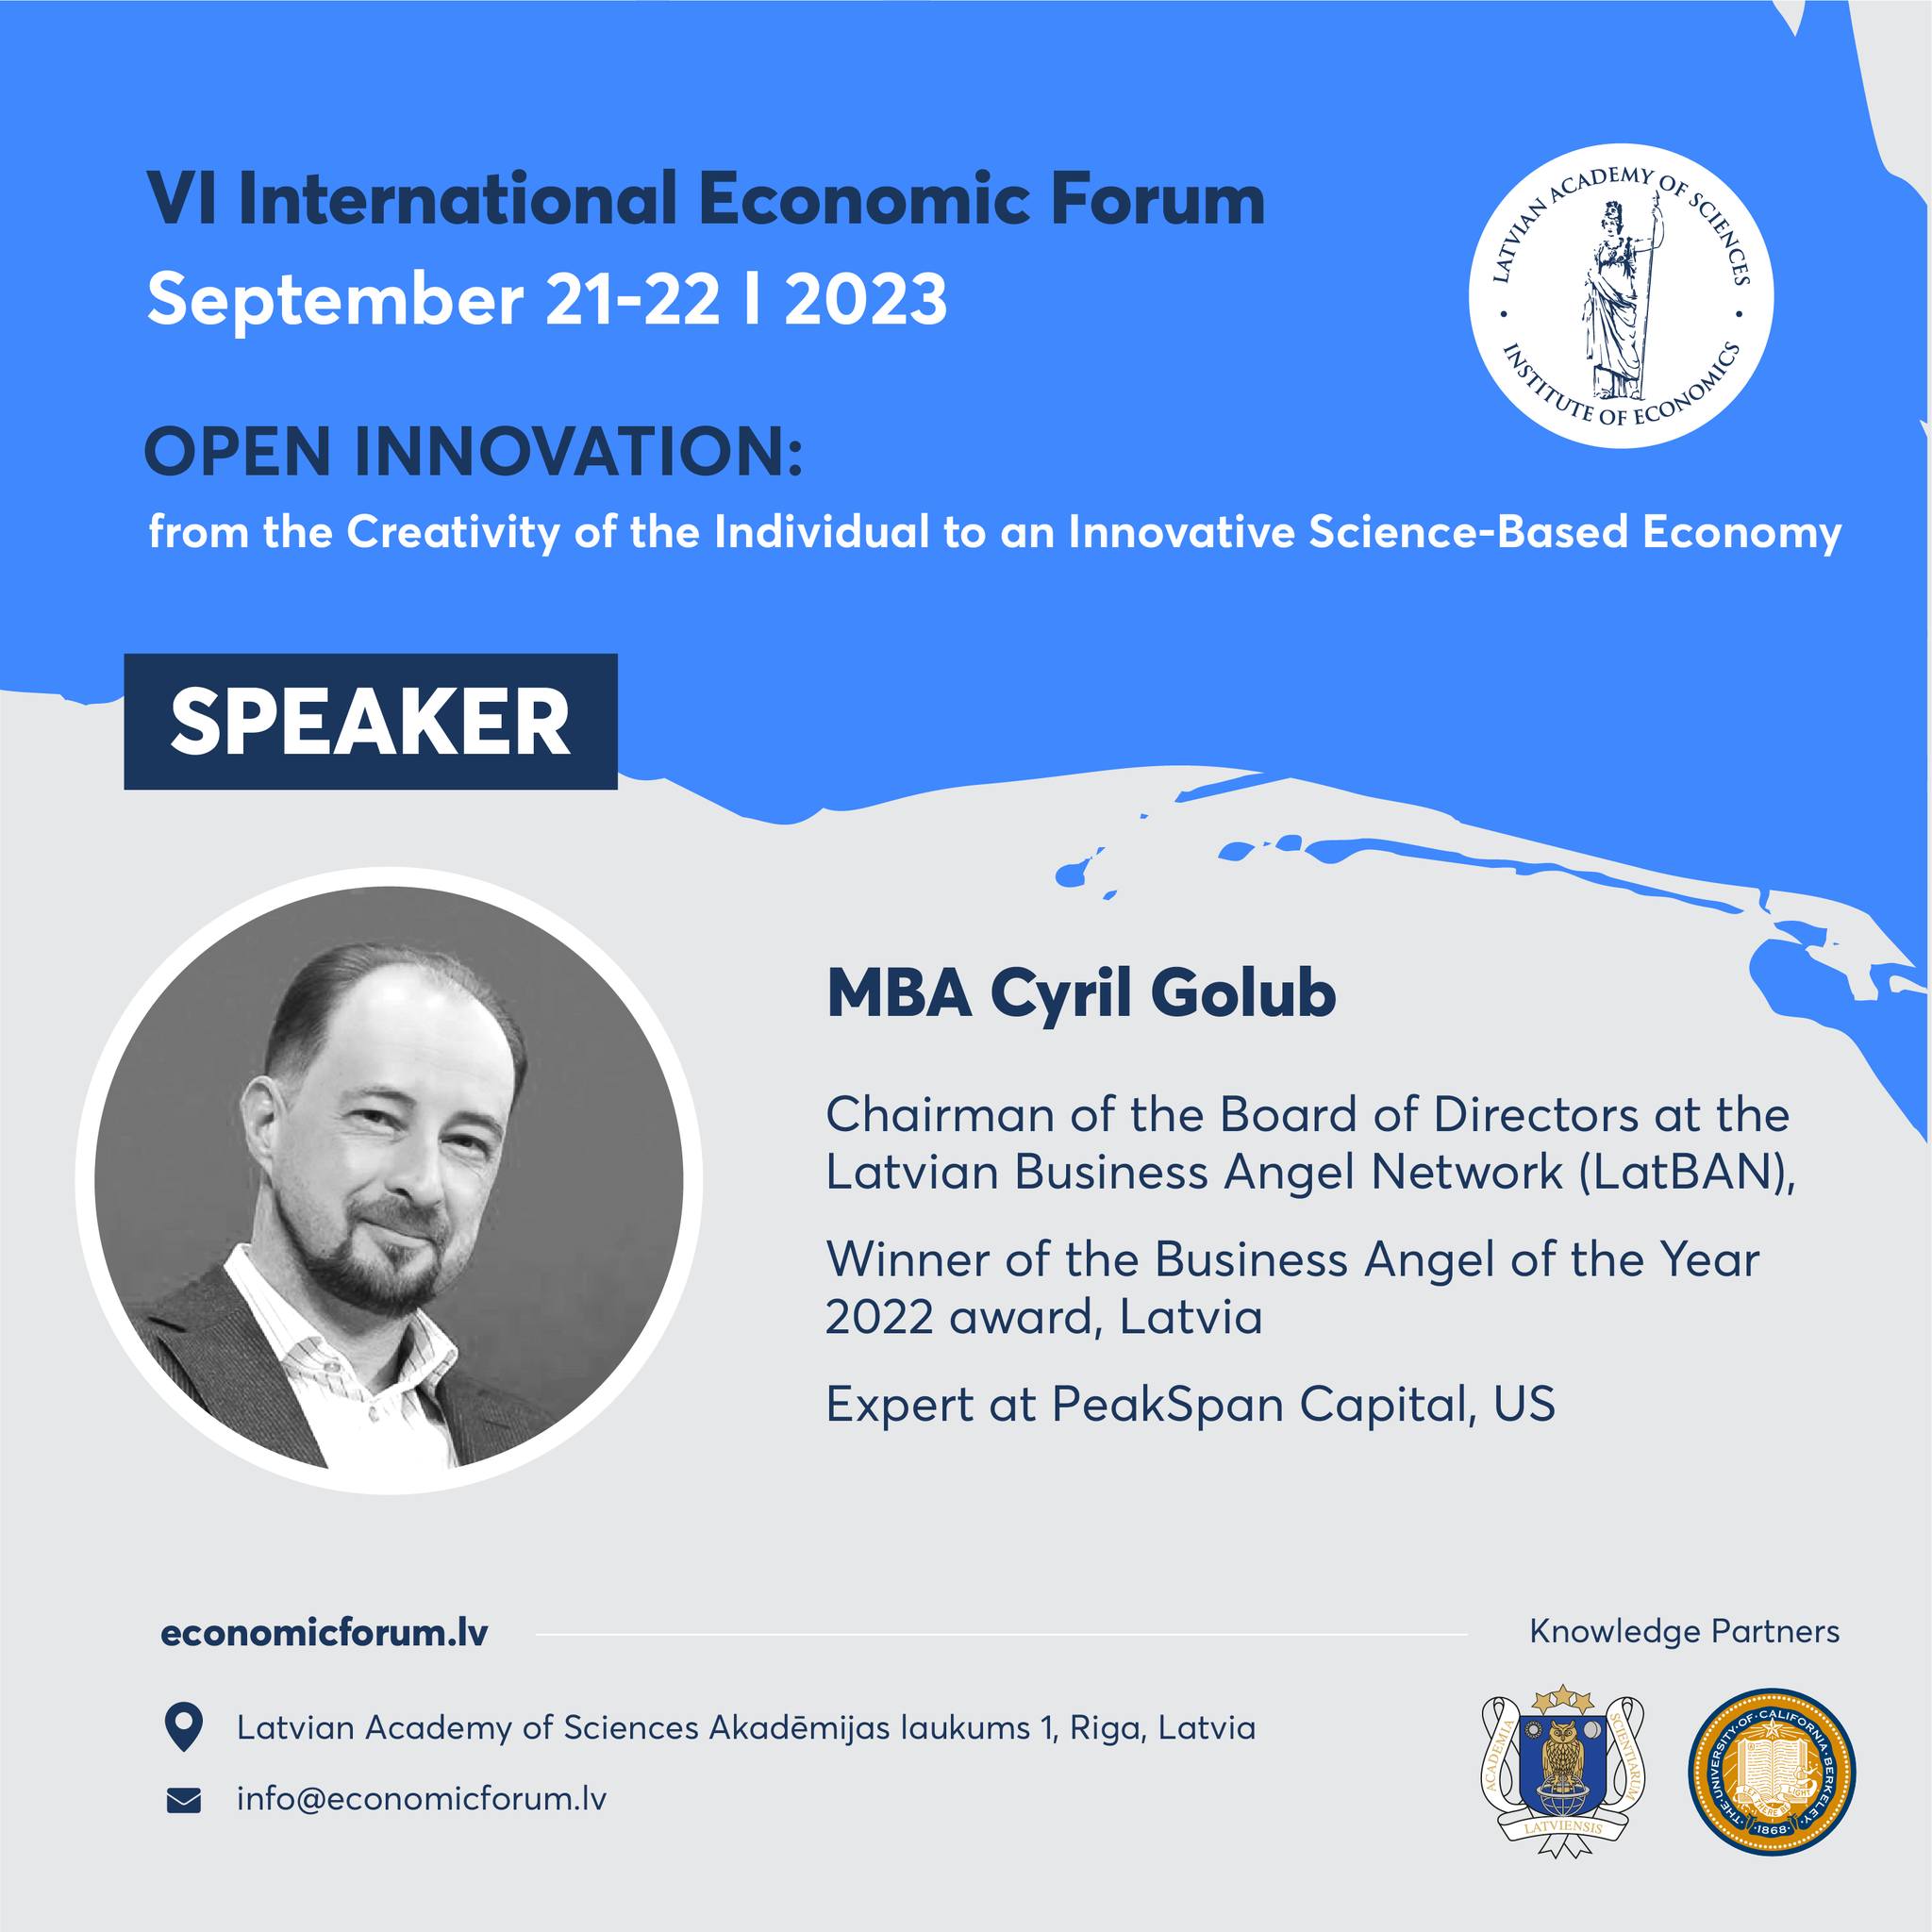 MBA Cyril Golub Chairman of the Board of Directors at the Latvian Business Angel Network